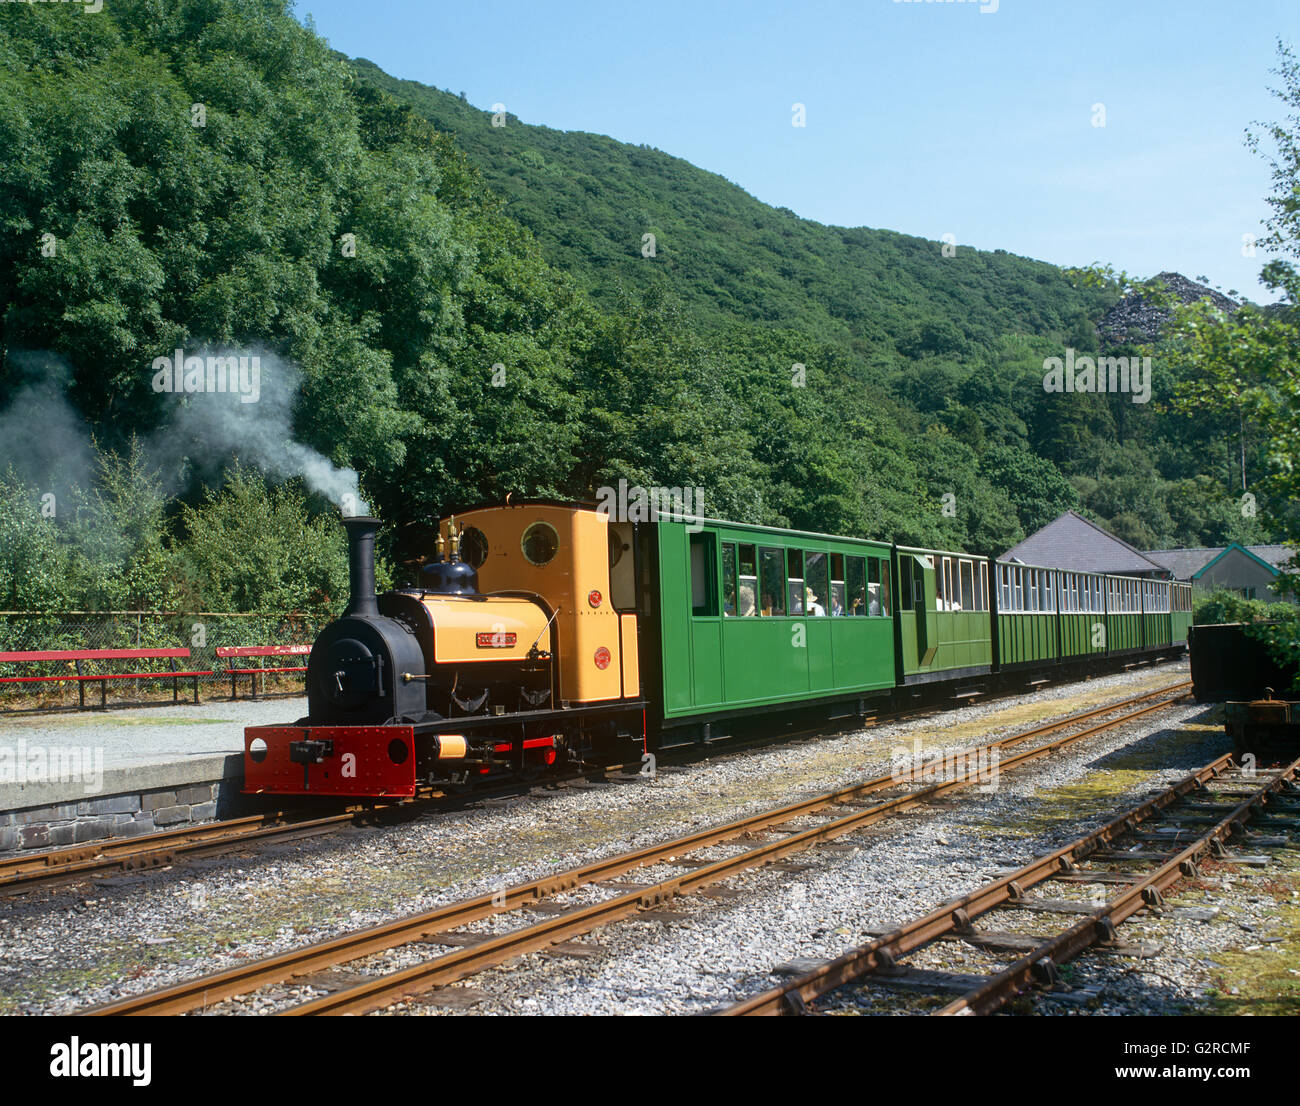 A green and yellow steam train on the tracks, outside. Stock Photo